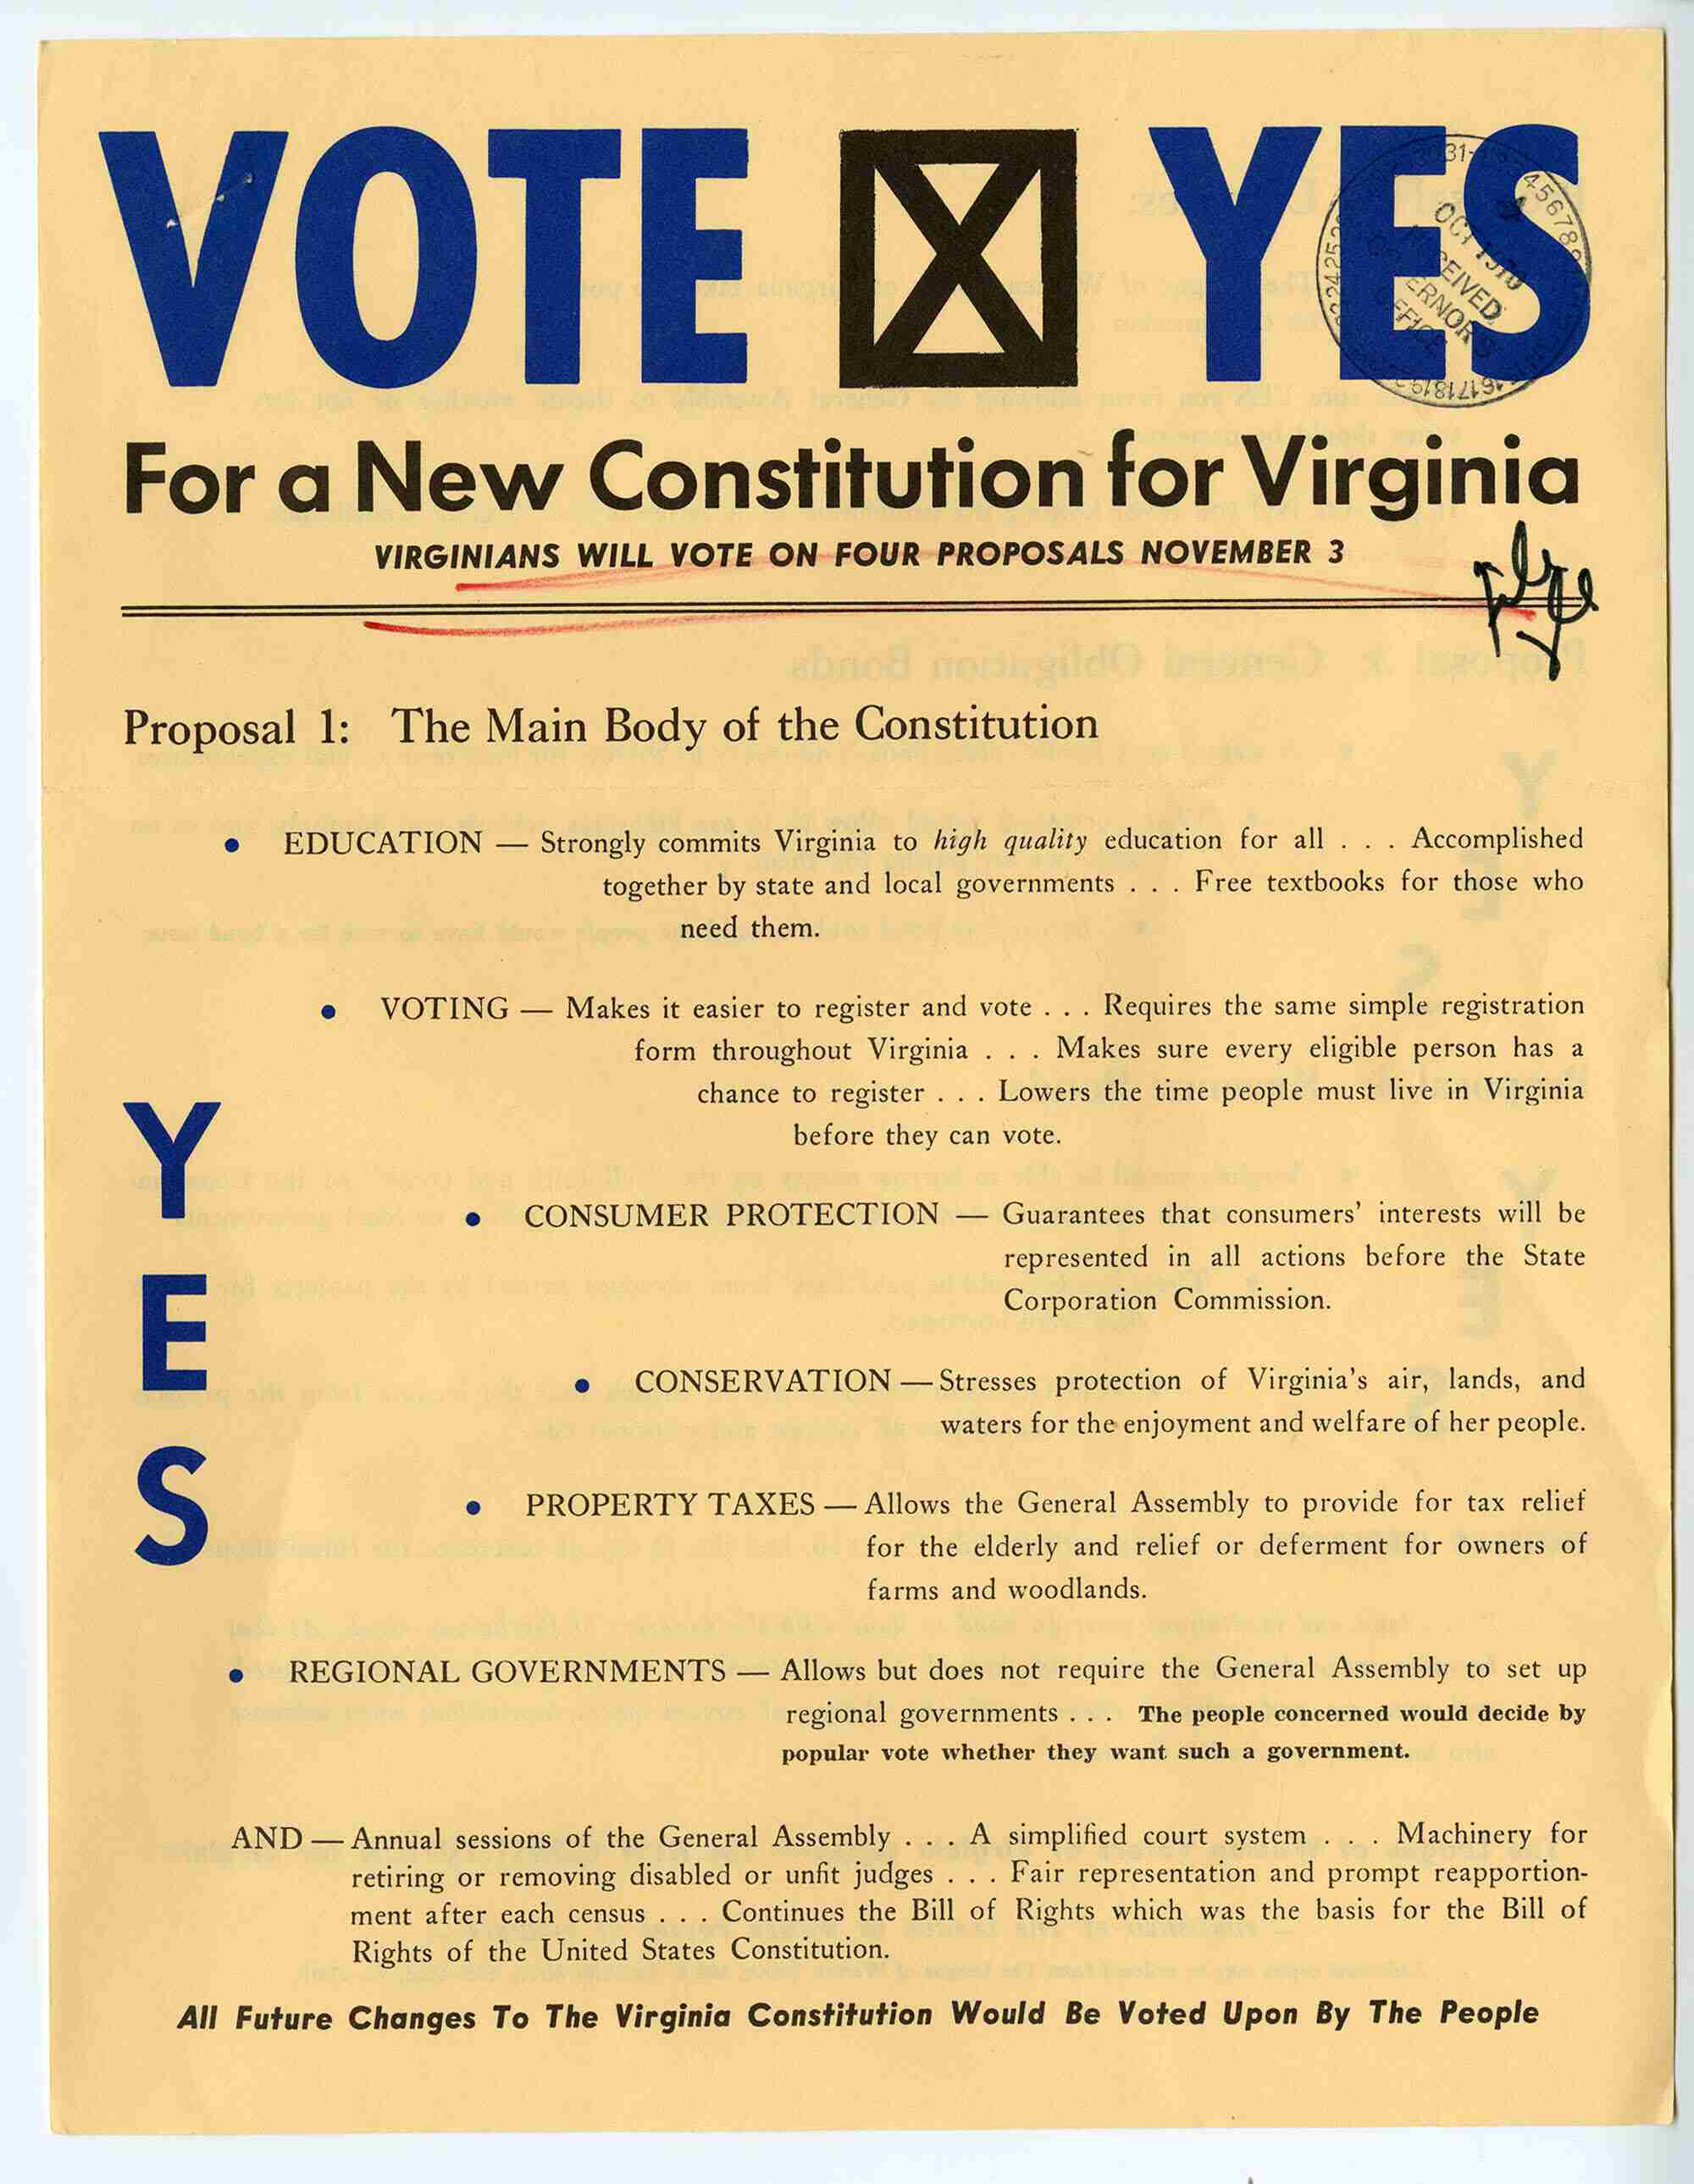 'VOTE YES For a New Constitution for Virginia: Virginians will Vote on Four Proposals November 3,' Published by The League of Women Voters of Virginia. From Virginia. Governor (1970–1974: Holton), Executive Papers, 1970–1974. Accessions 28050, Box 40, 'Before Inauguration' Folder. Library of Virginia.